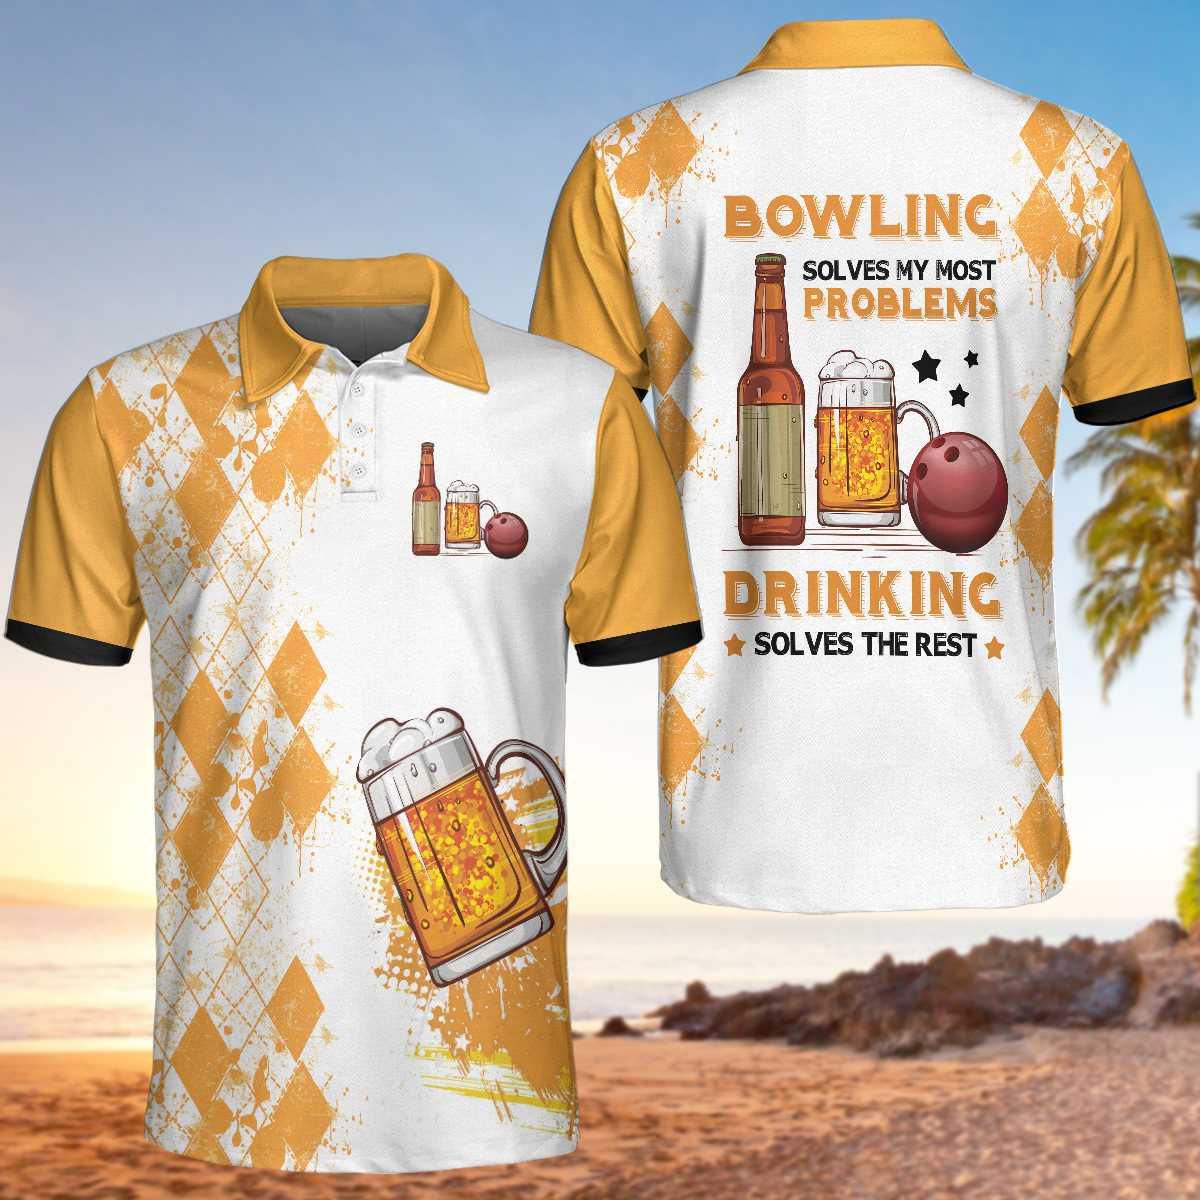 Bowling Men Polo Shirt - Bowling Solves My Most Problems Drinking Solves The Rest, Argyle Pattern Beer Bowling Polo Shirt - Gift For Friend, Family, Bowling Lovers - Amzanimalsgift